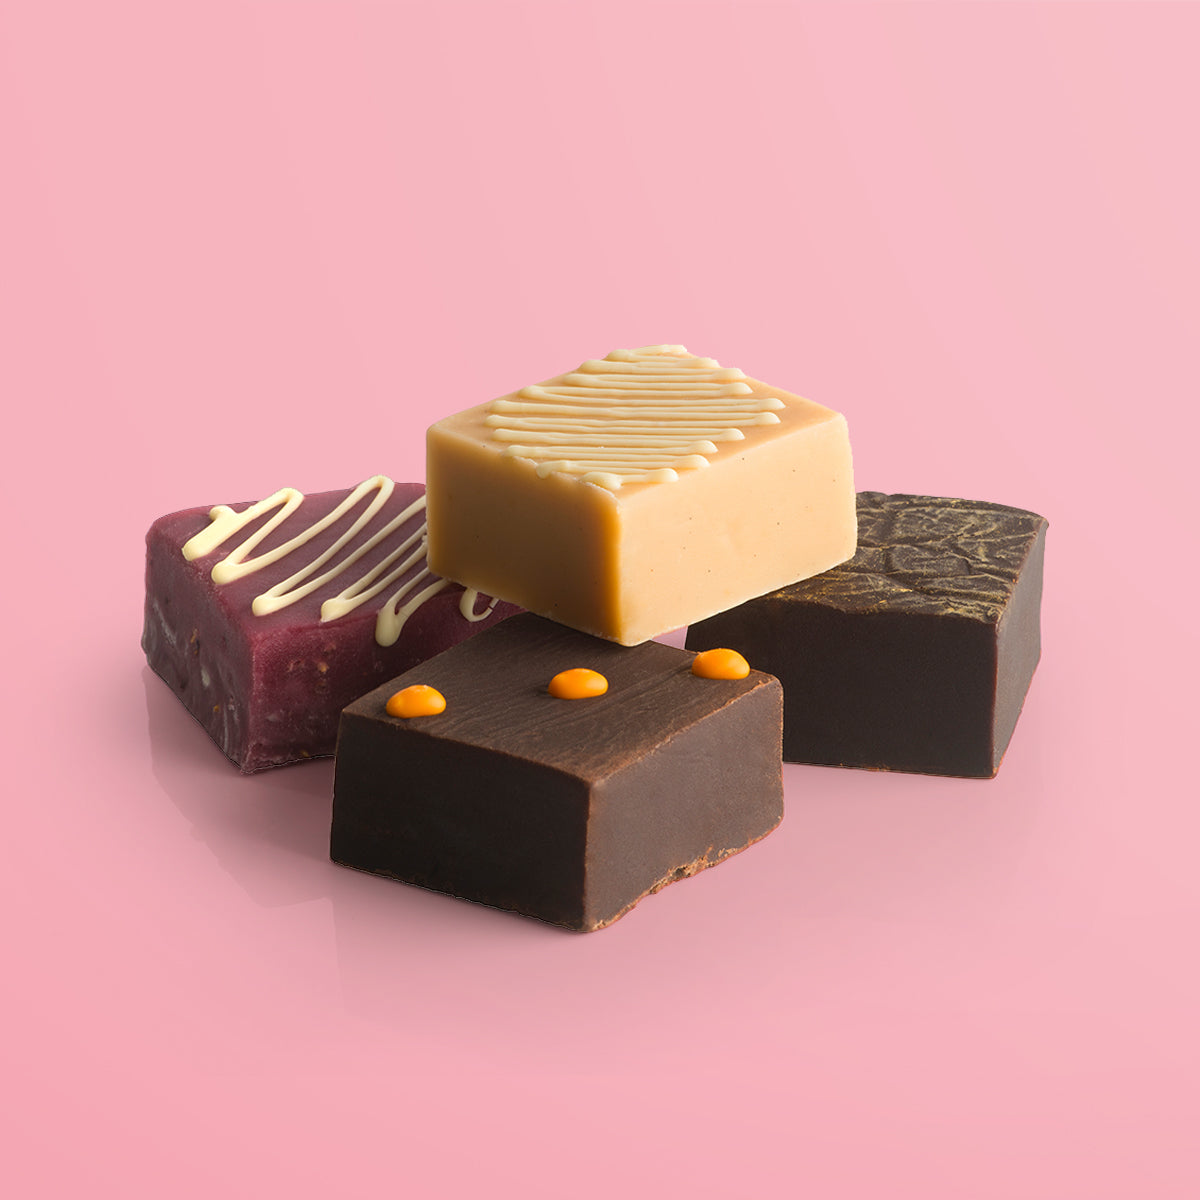 Group of butter fudge sharing squares in a variety of flavours